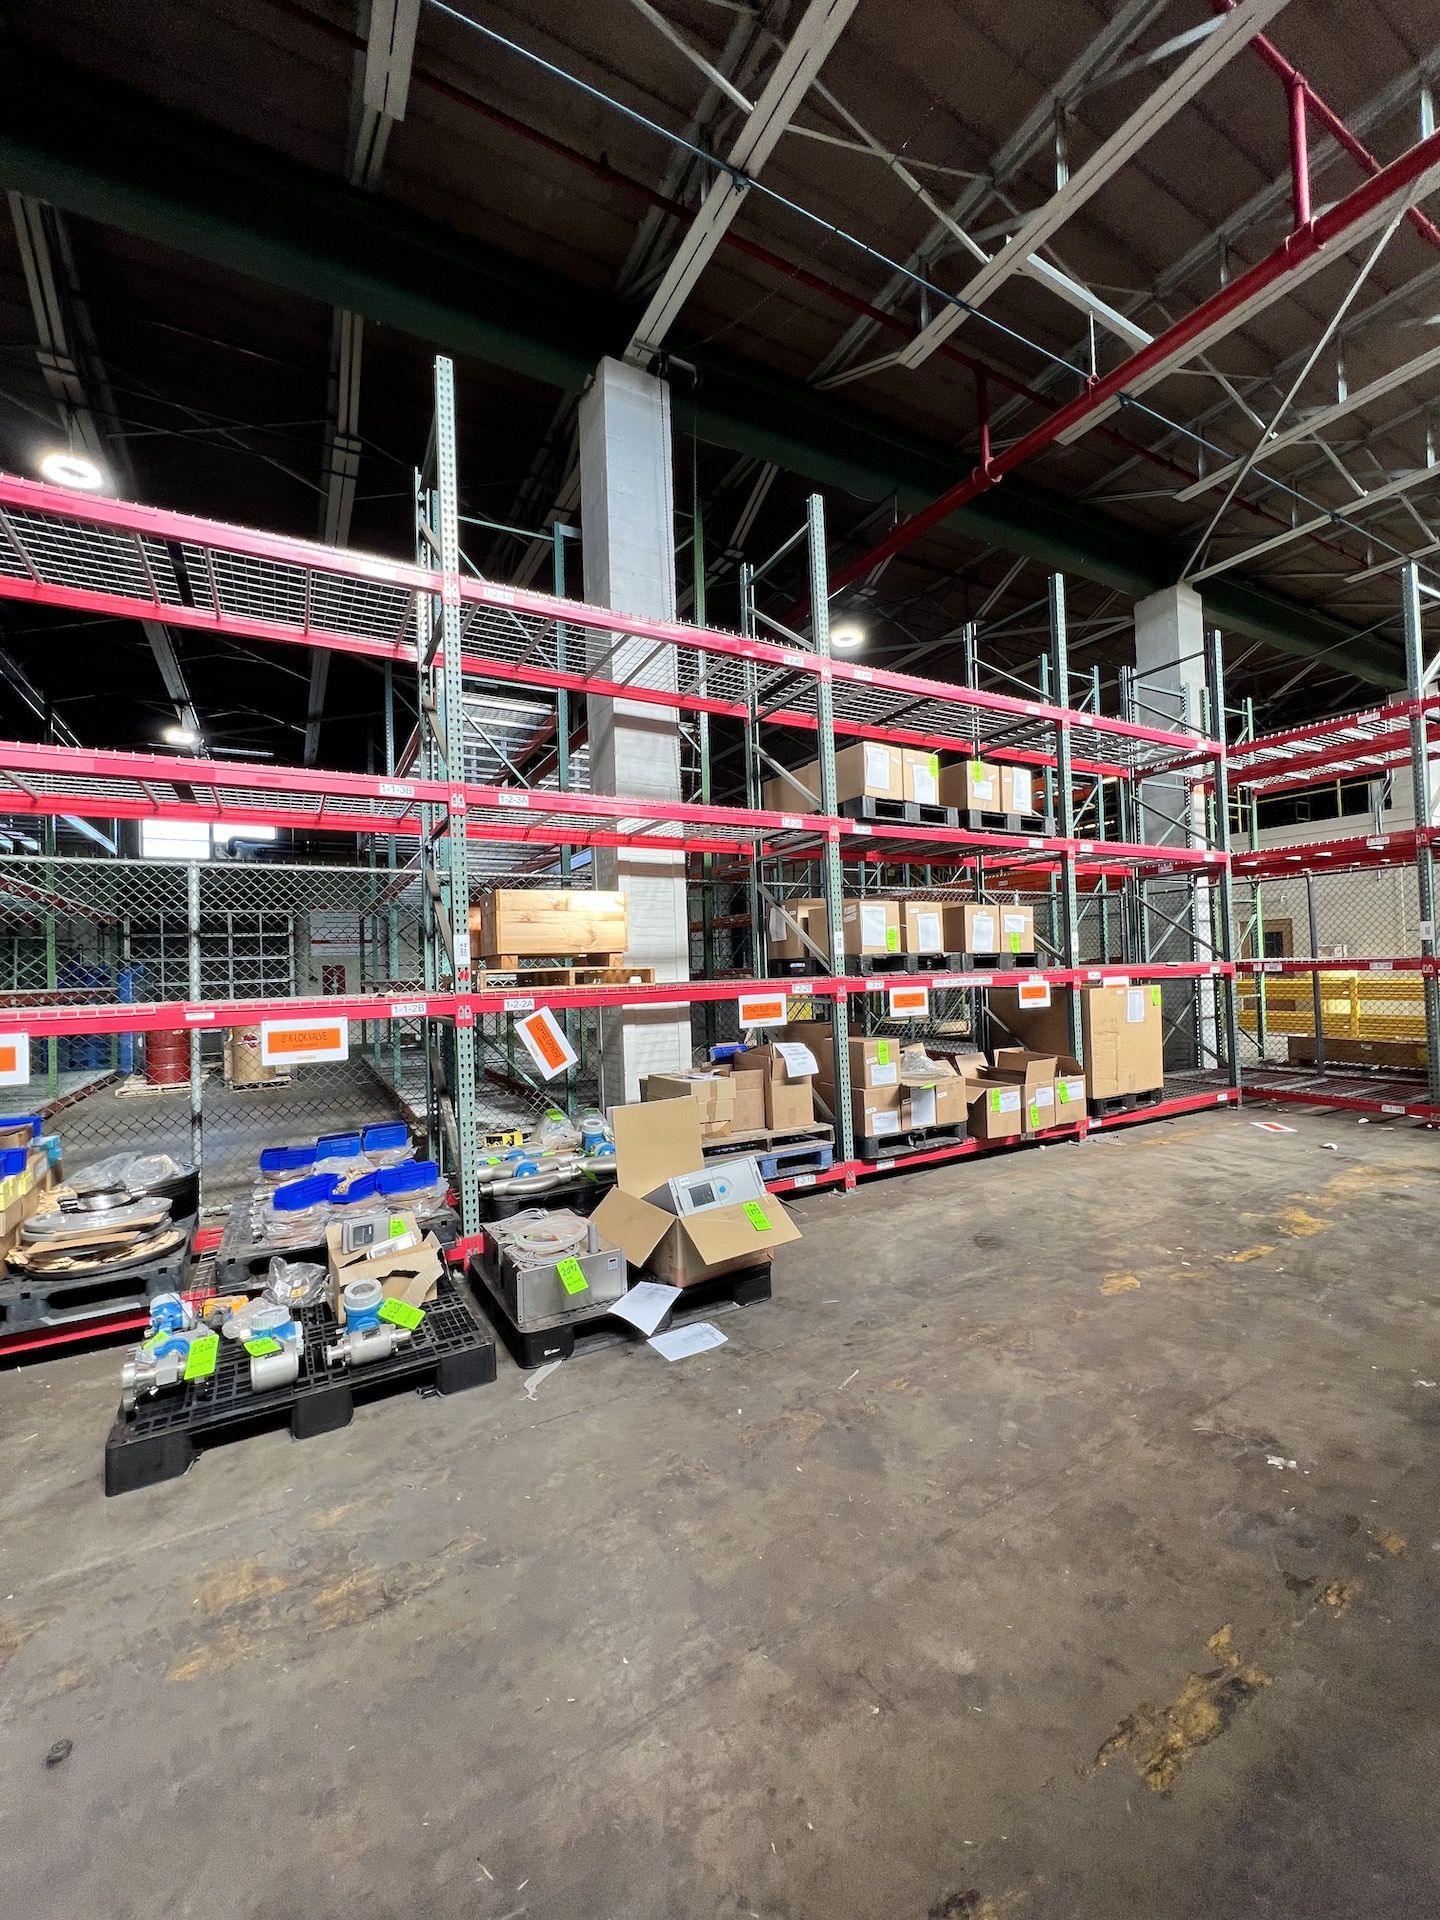 PALLET RACKING, INCLUDES APPROX. 88 PALLET SPACES, 86 CROSS BEAMS AND 14 UP RIGHTS - Image 6 of 6